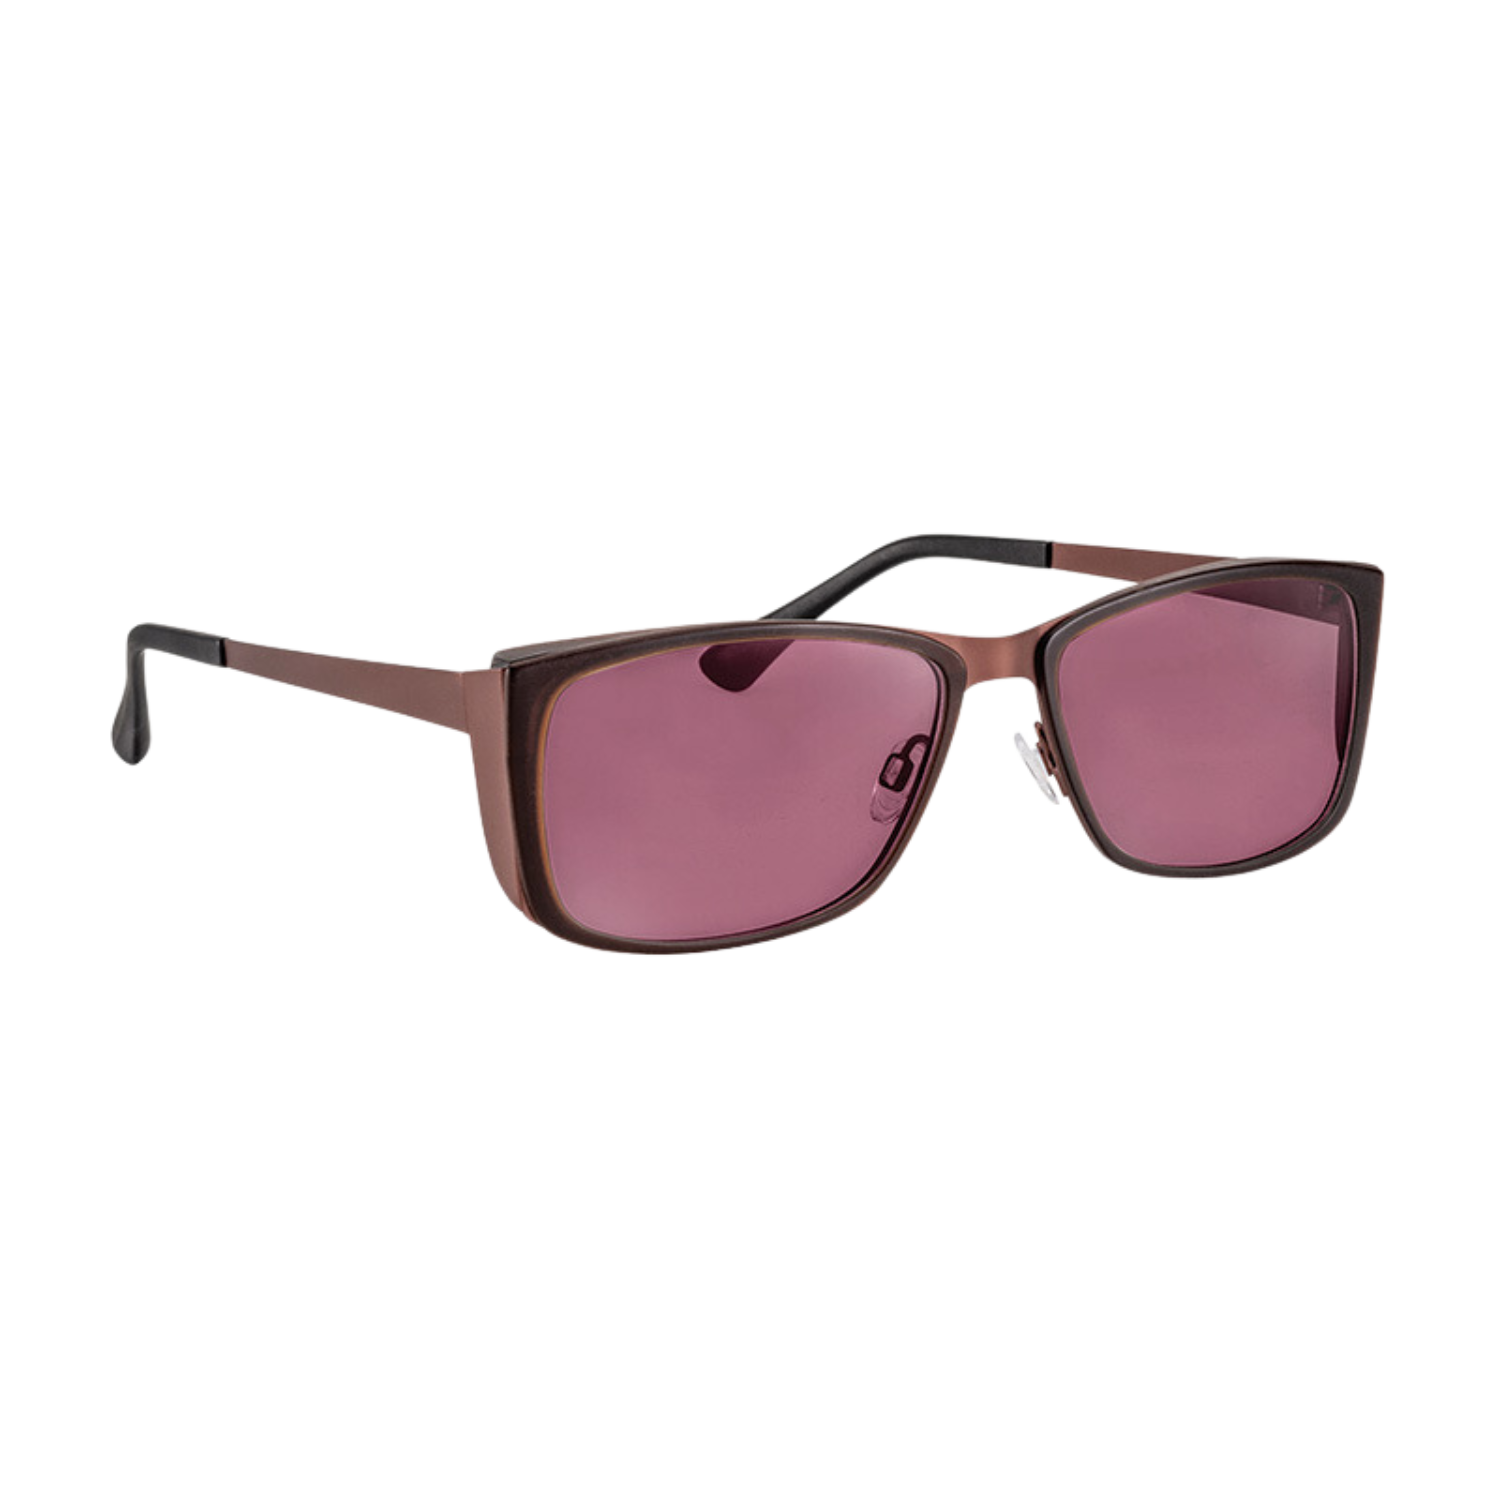 Image of the Acunis FL-41 Light Sensitivity Glasses with Brown Stainless Steel Frames and 75% light absorption.